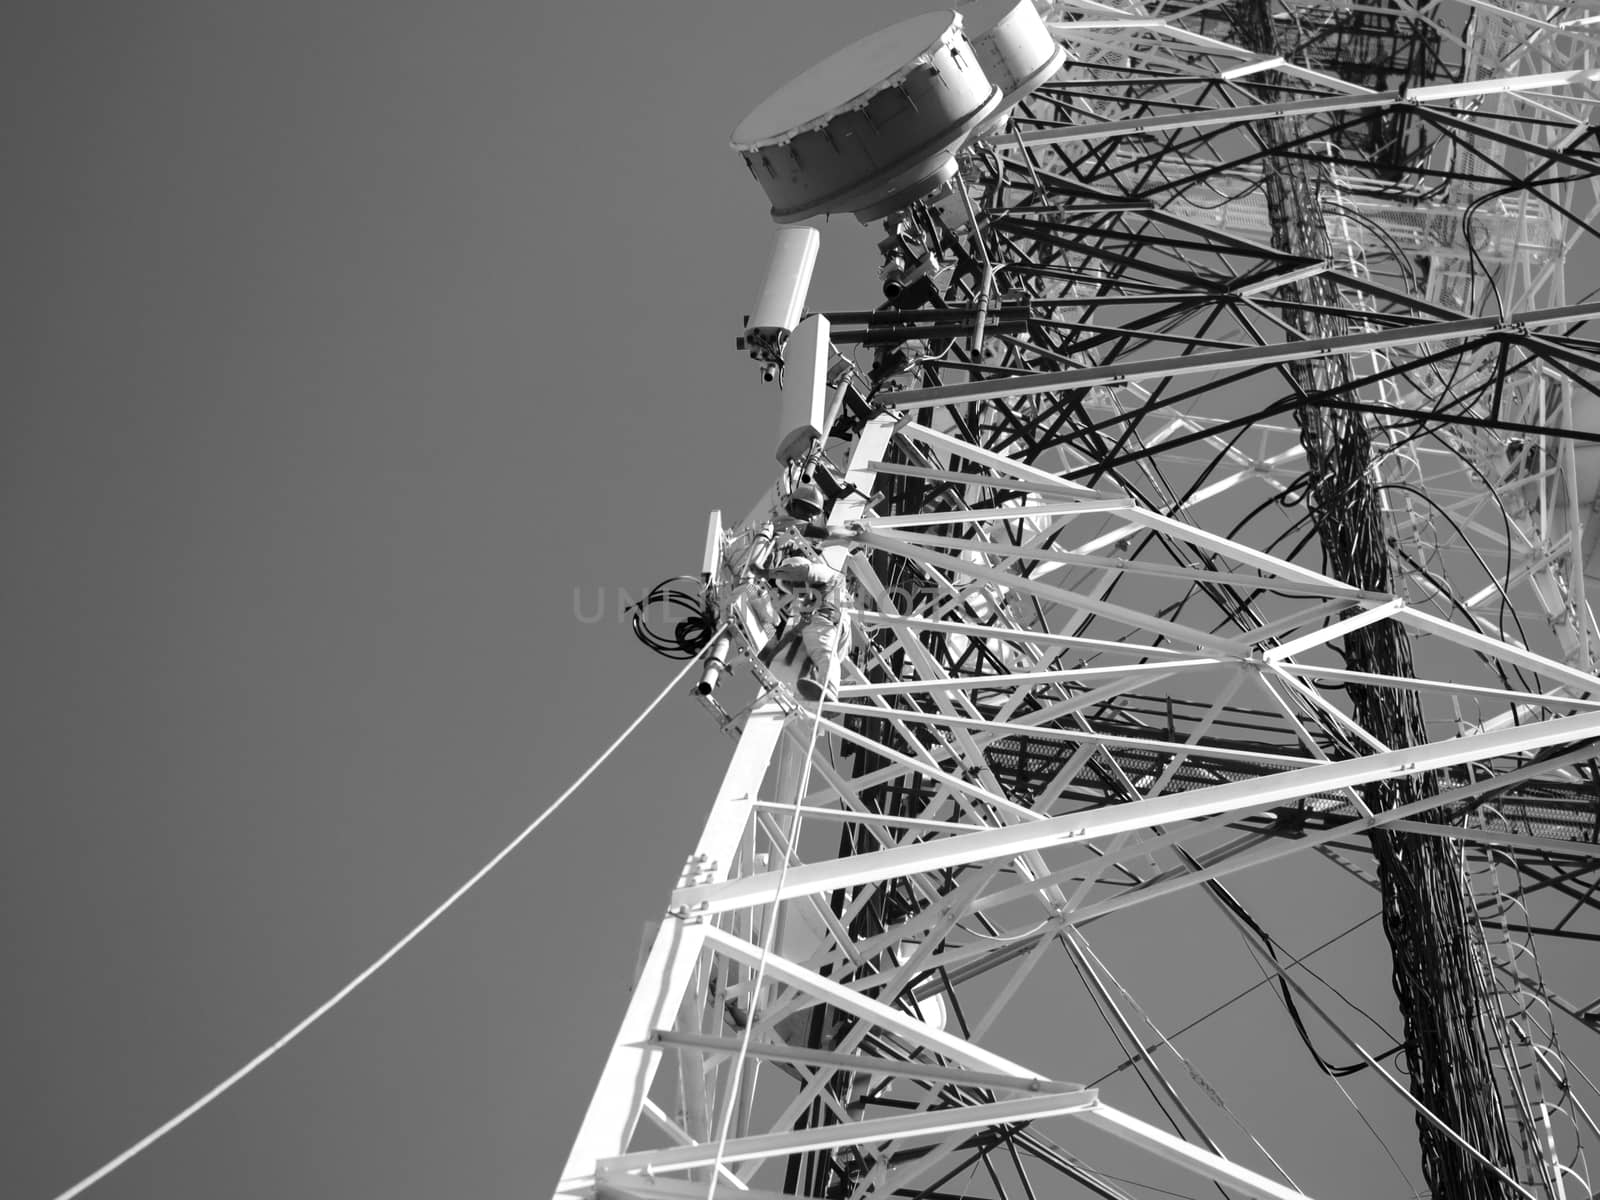 BLACK AND WHITE PHOTO OF TELECOM WORKERS REPAIRING CABLES ON TOWER